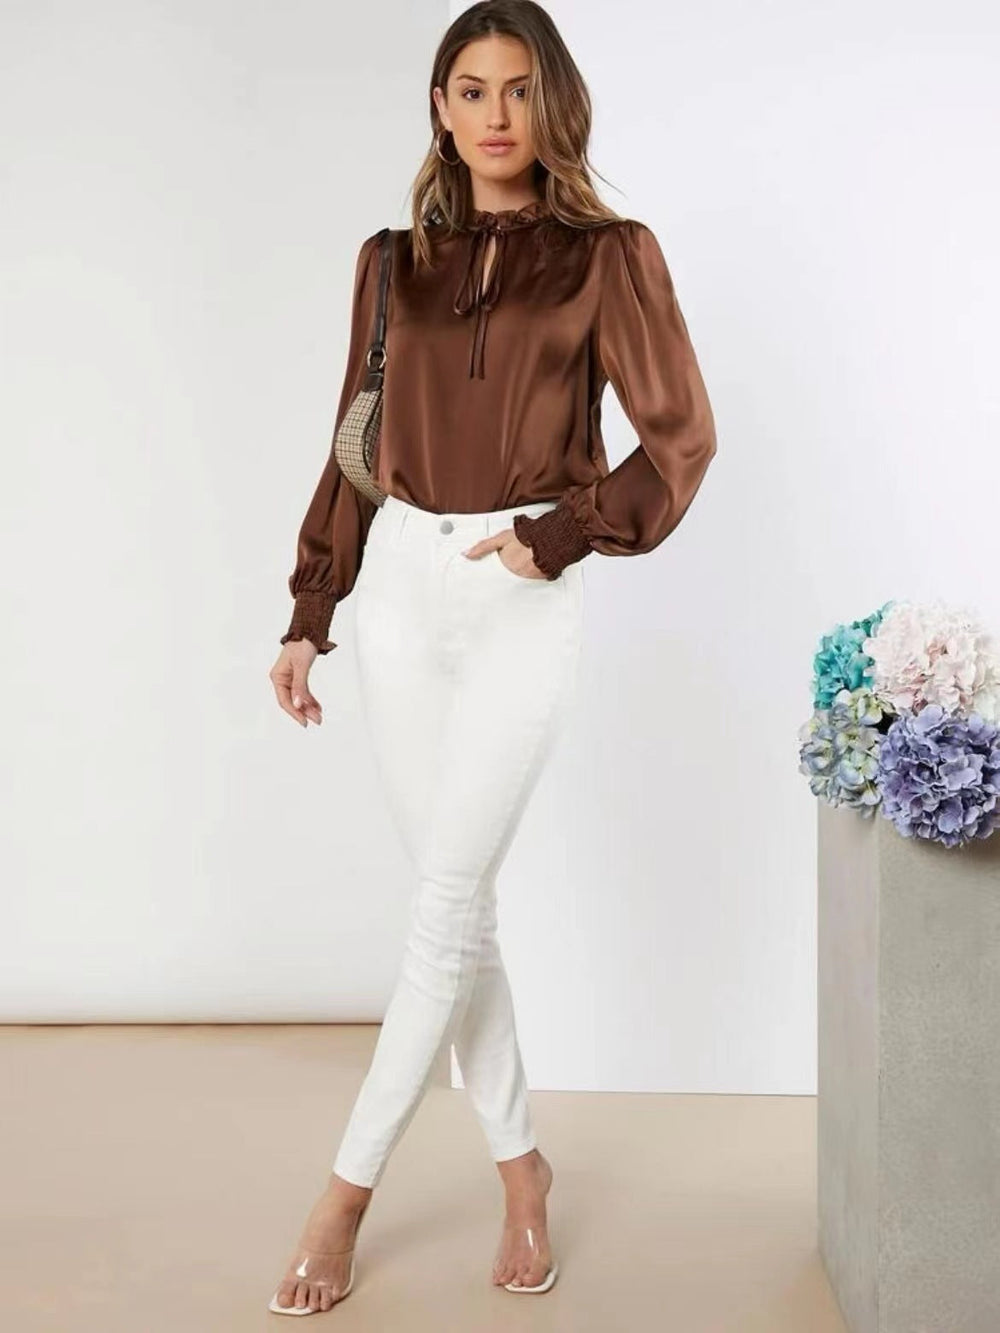 Women Shirt Autumn Arrival Elegant Solid Color Round Neck Long Sleeve Lace up Straight Satin Blouse